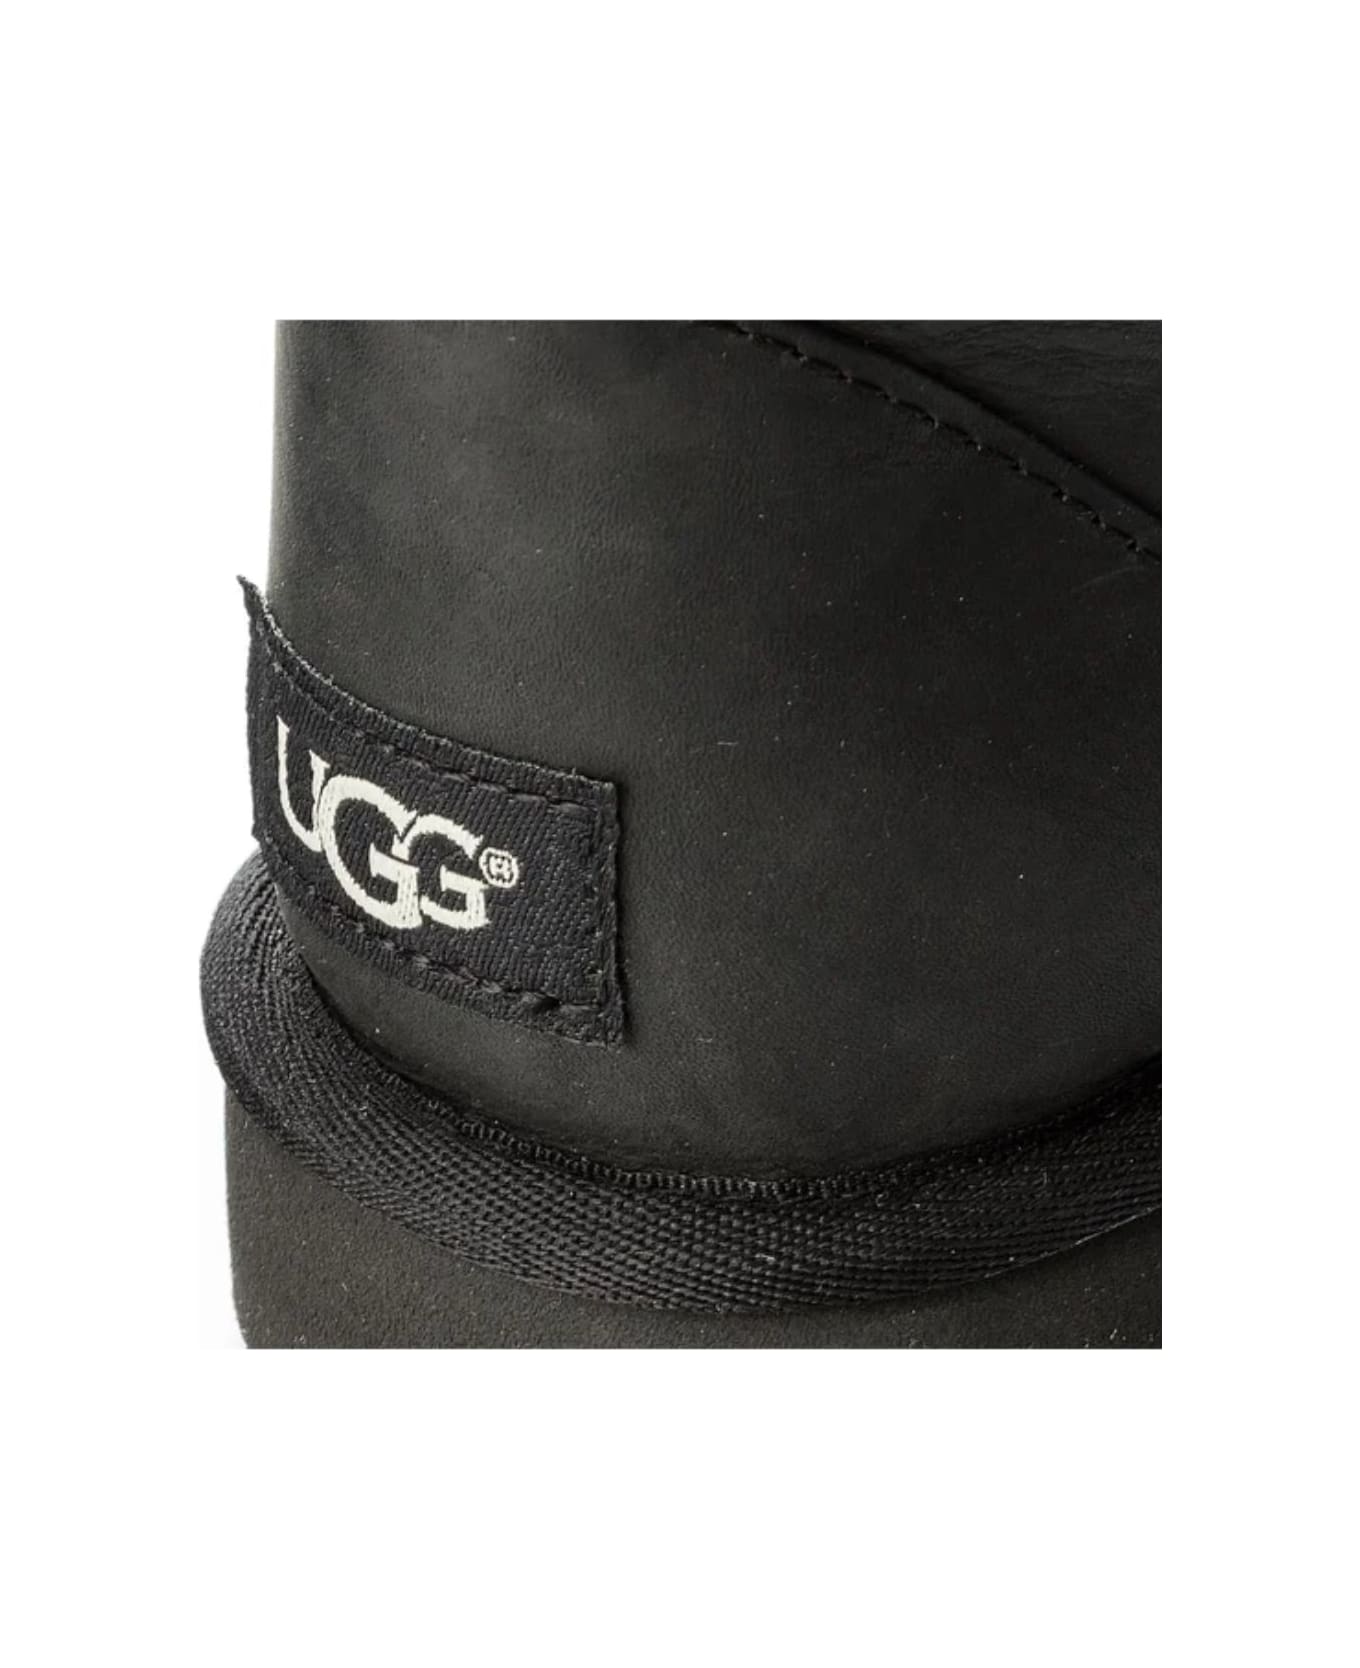 UGG W Classic Short Leather Shoes - Blk Black